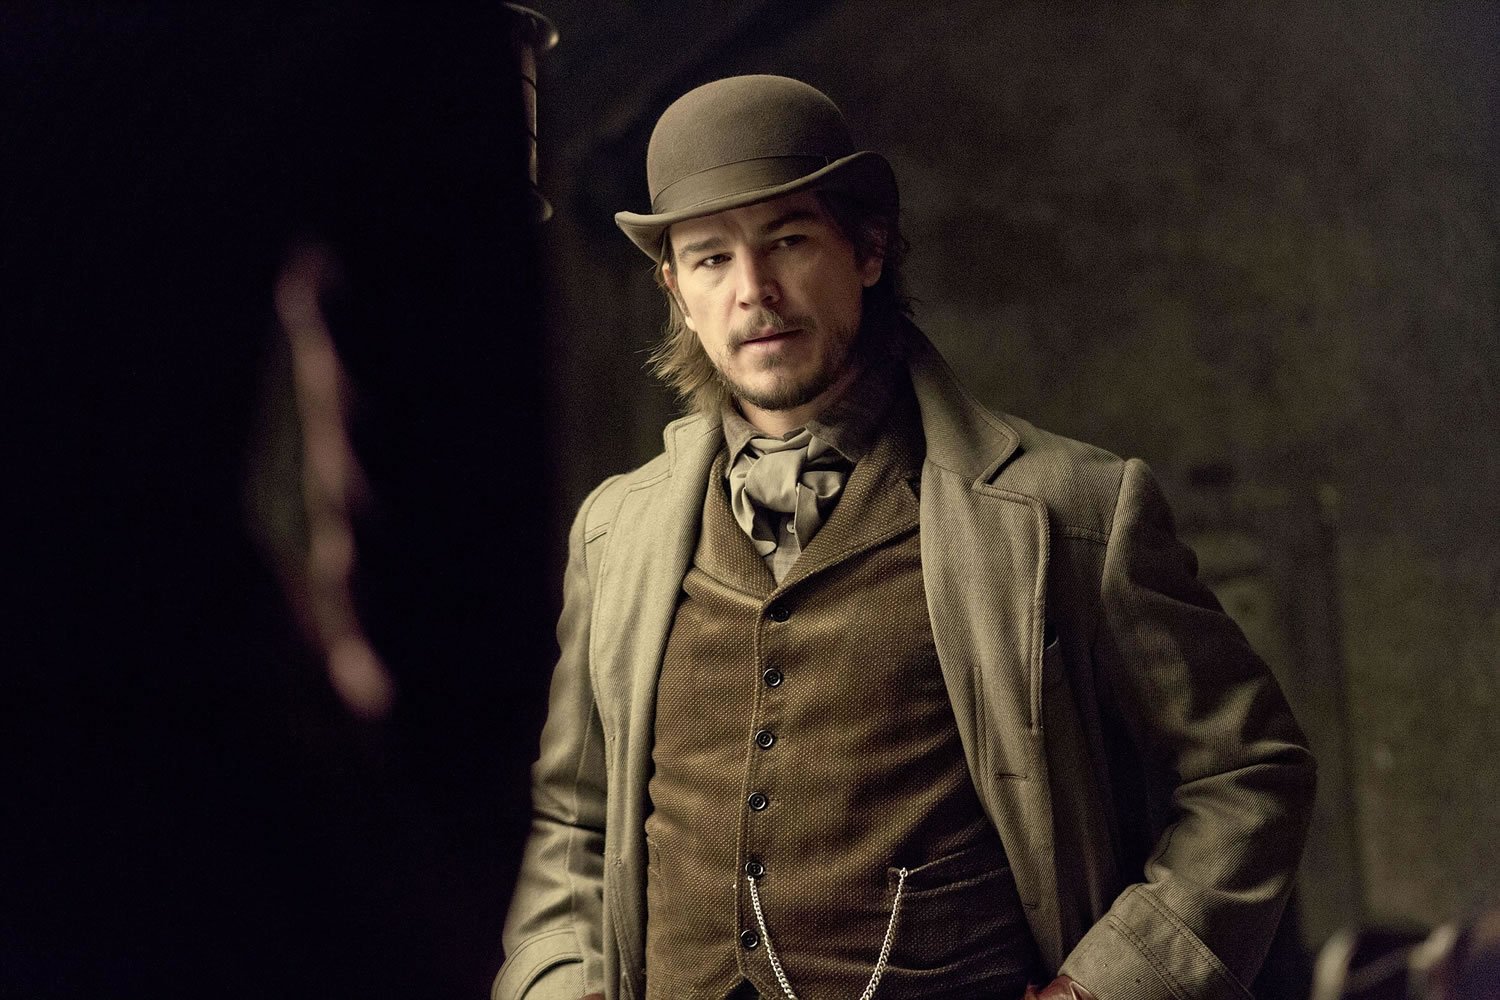 Showtime files
Josh Hartnett plays troubled American gun-for-hire Ethan Chandler, who is ensnared by Victorian London's dark side in the horror-drama-psychological study &quot;Penny Dreadful.&quot;